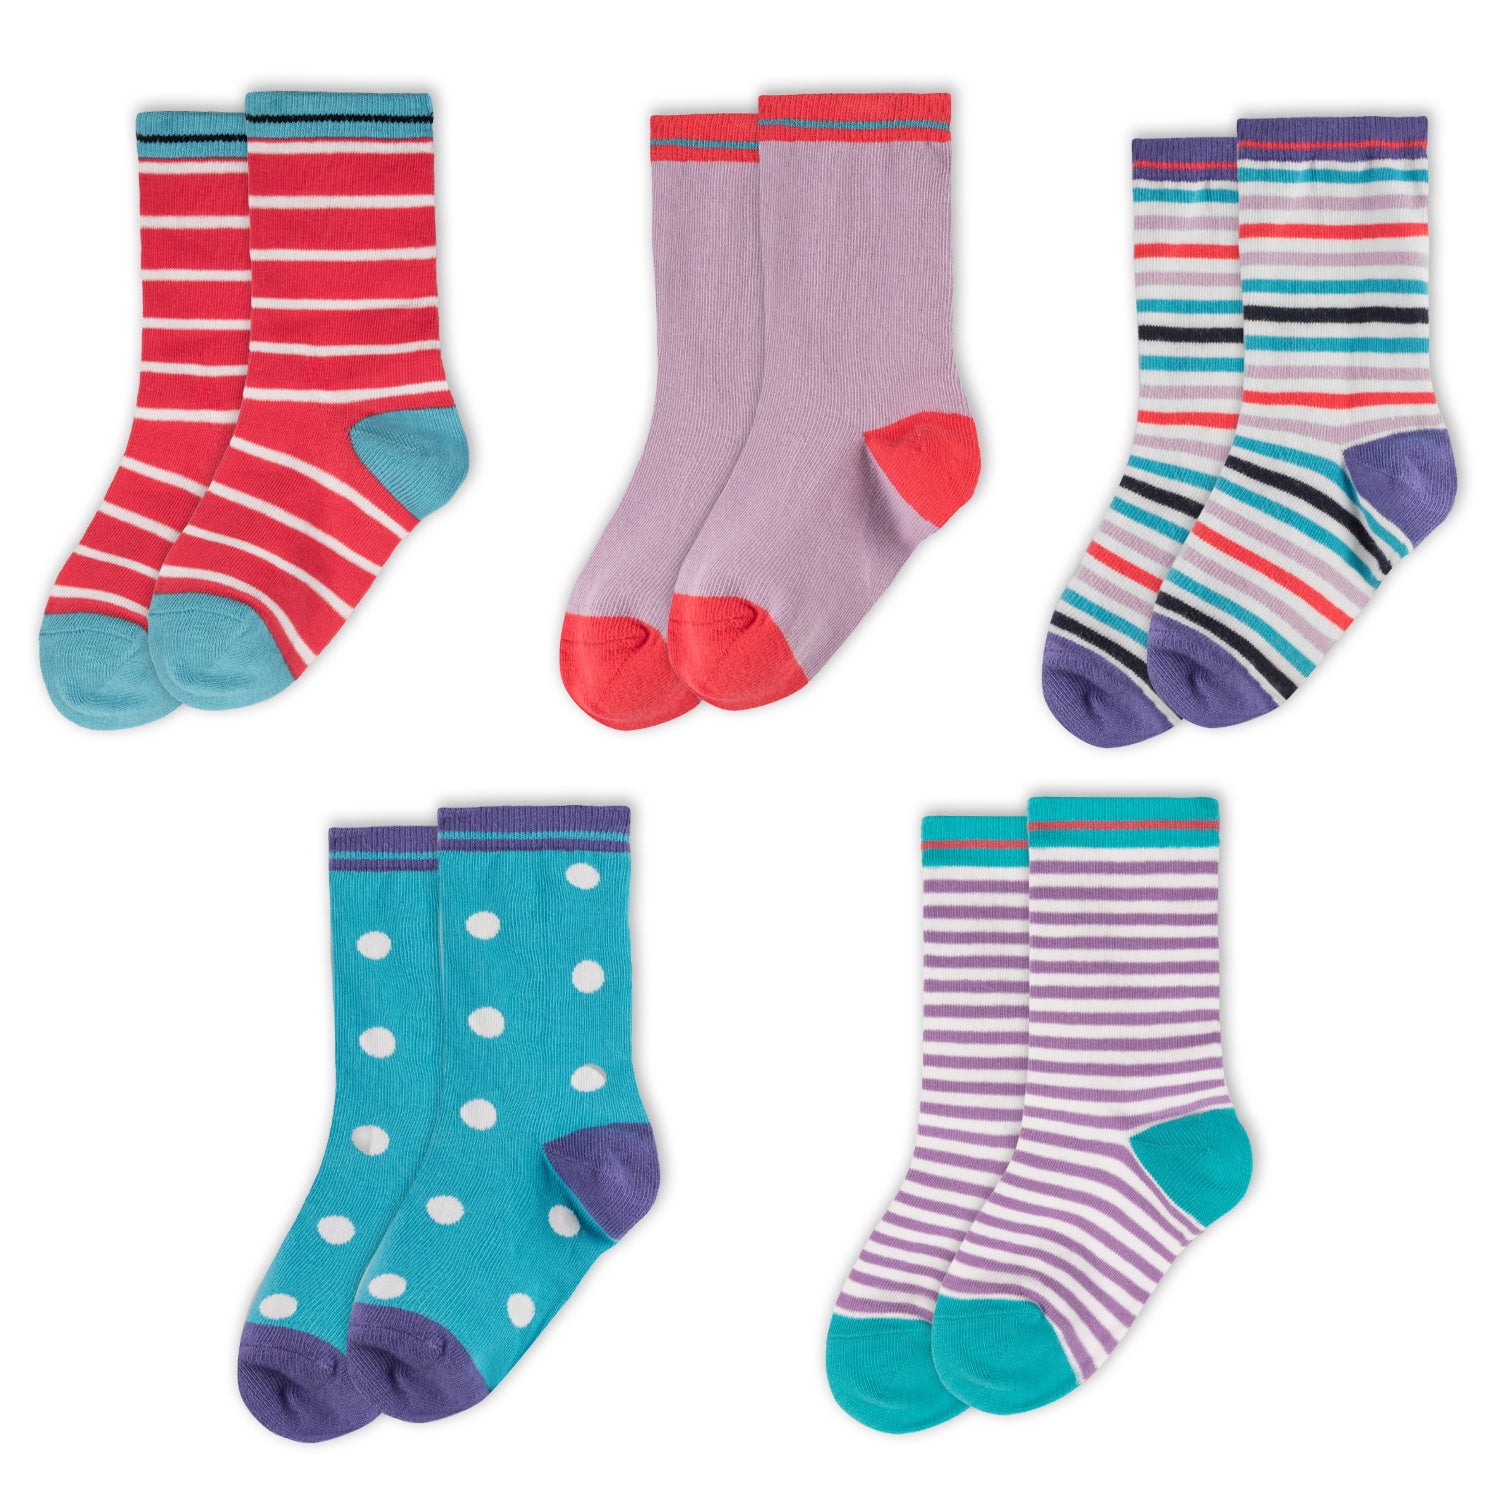 Assorted kids’ socks featuring vibrant colors and fun designs